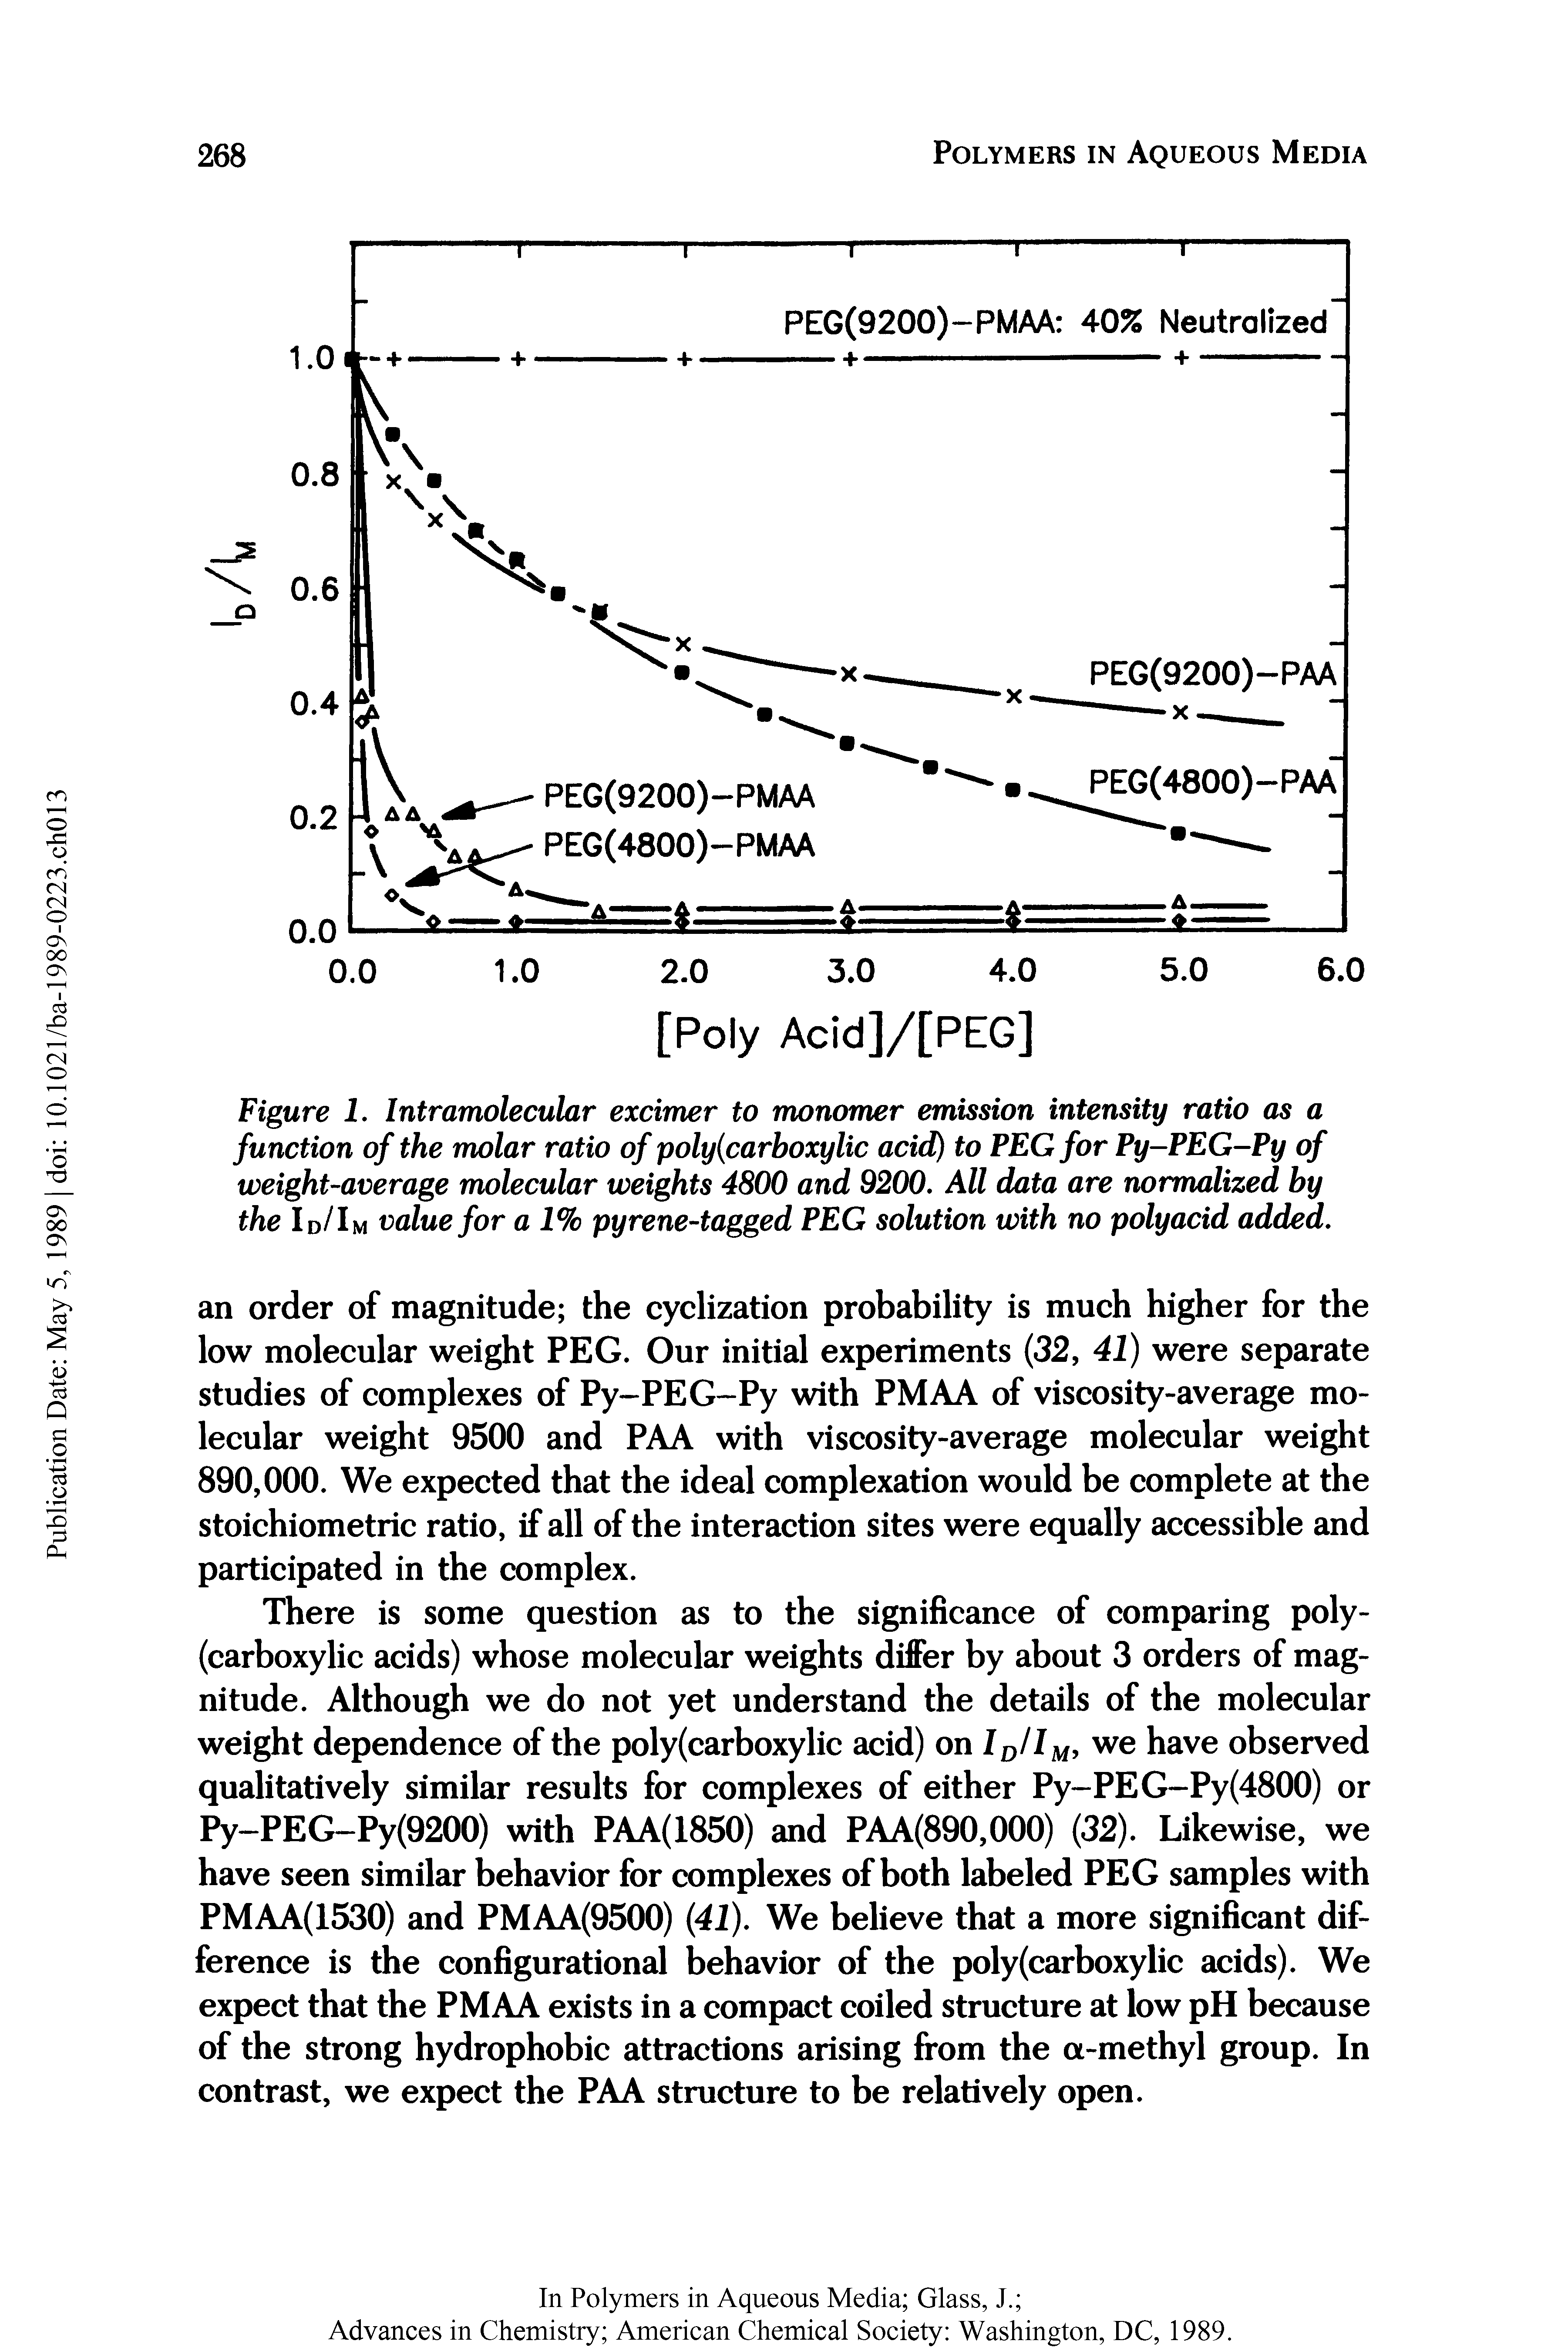 Figure 1. Intramolecular excimer to monomer emission intensity ratio as a function of the molar ratio of poly carboxylic acid) to PEG for Py-PEG-Py of weight-average molecular weights 4800 and 9200. All data are nomwlized by the Id/Im value for a 1% pyrene-tagged PEG solution with no polyacid added.